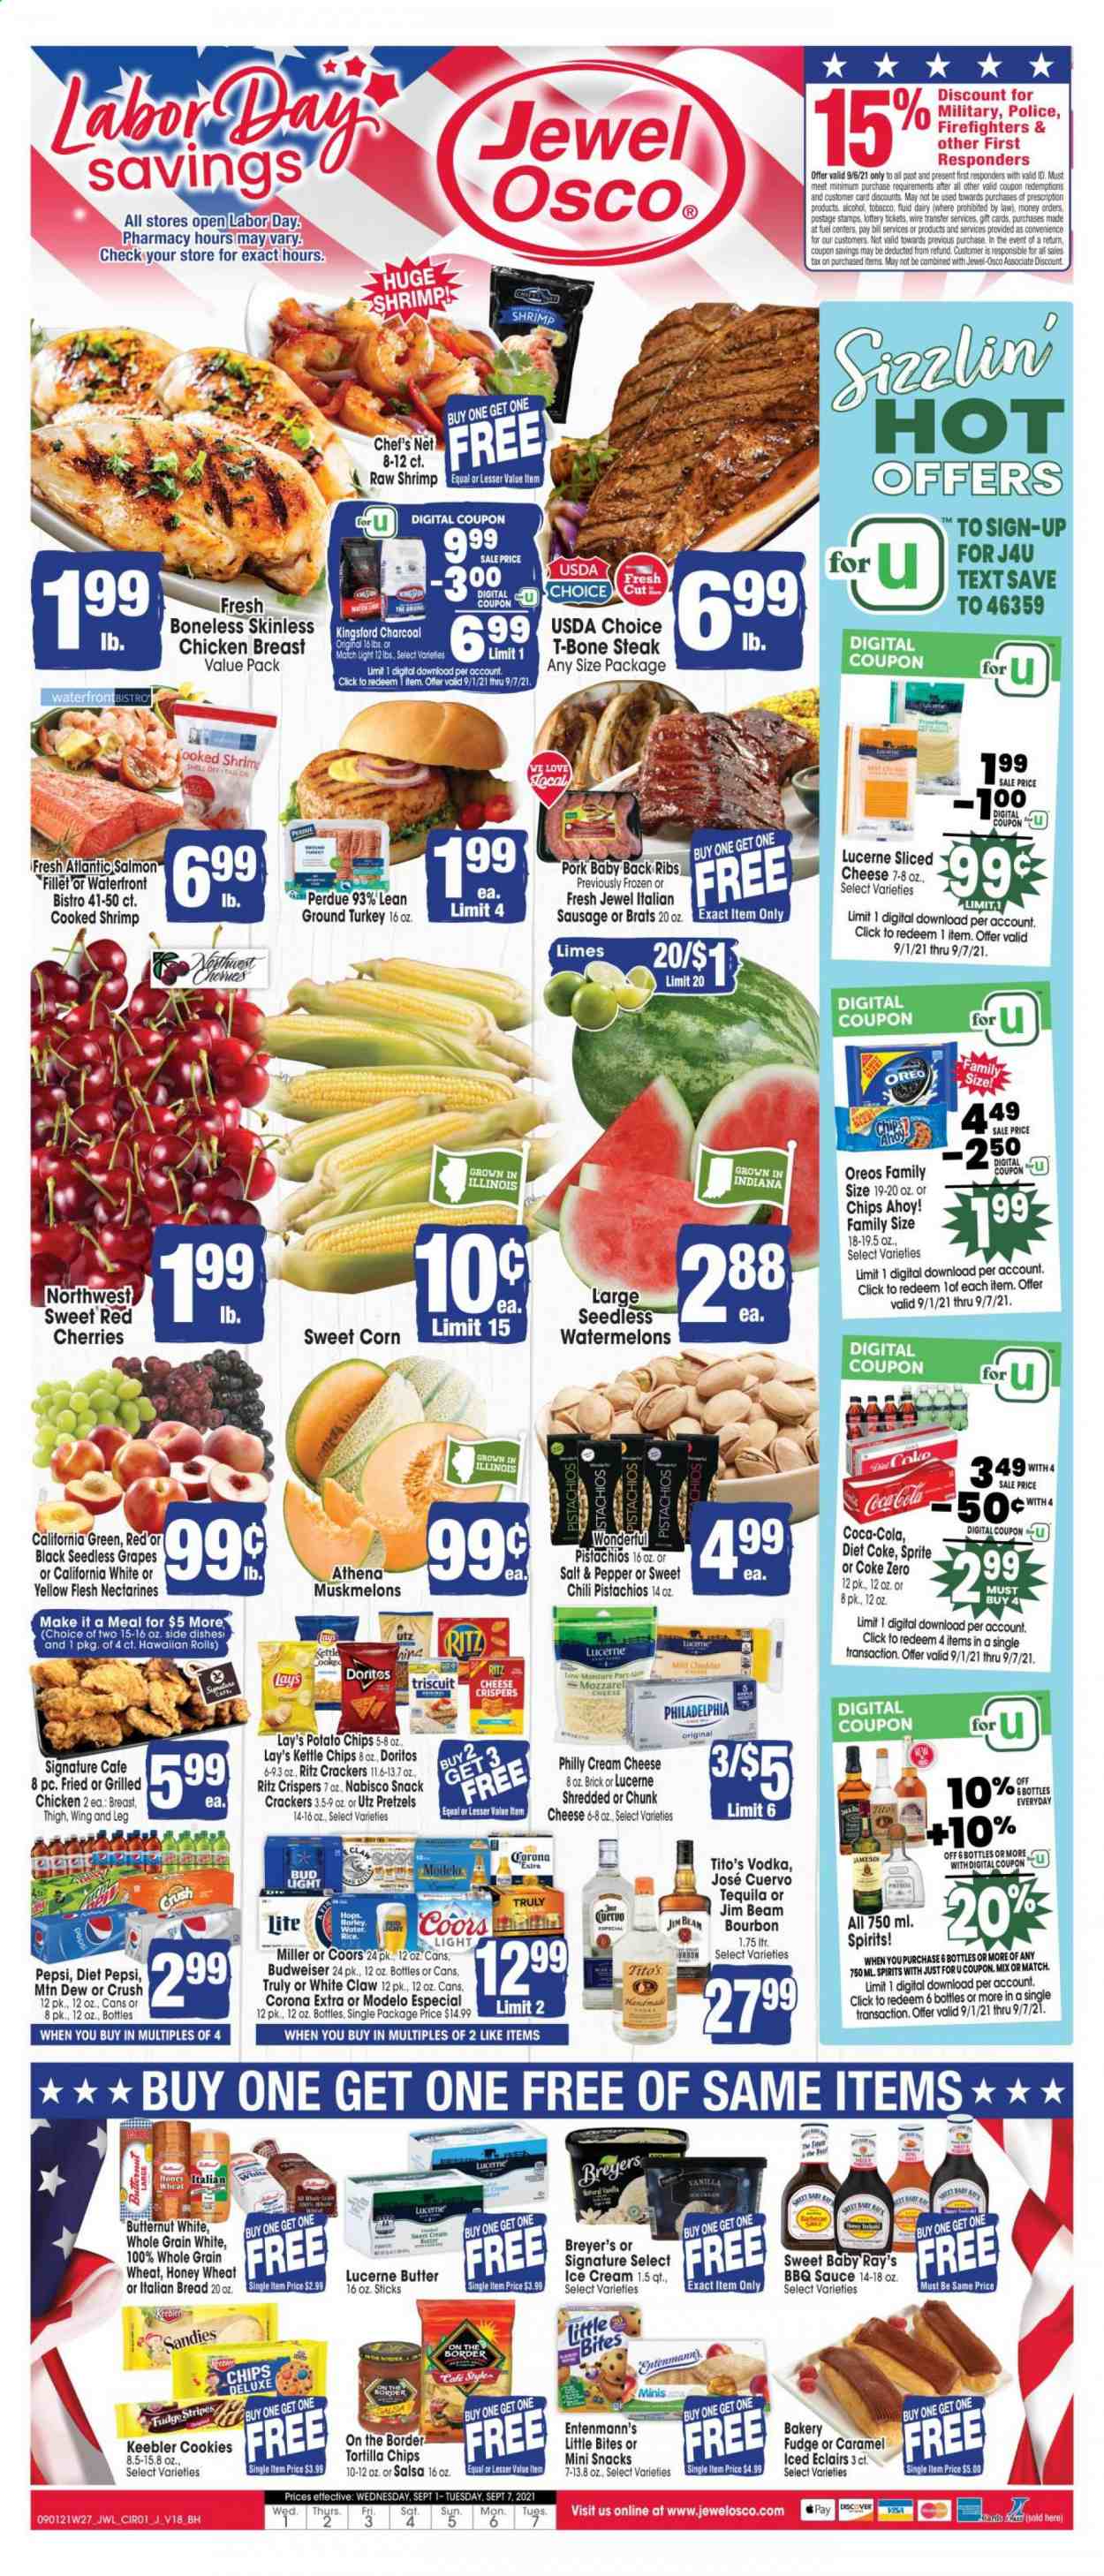 thumbnail - Jewel Osco Flyer - 09/01/2021 - 09/07/2021 - Sales products - seedless grapes, bread, pretzels, Entenmann's, corn, sweet corn, grapes, limes, cherries, salmon, salmon fillet, shrimps, sauce, Perdue®, sausage, italian sausage, cream cheese, sliced cheese, Philadelphia, chunk cheese, Oreo, butter, ice cream, cookies, fudge, snack, crackers, Chips Ahoy!, Little Bites, Keebler, RITZ, Doritos, tortilla chips, potato chips, Lay’s, BBQ sauce, salsa, pistachios, Coca-Cola, Mountain Dew, Sprite, Pepsi, Diet Pepsi, Diet Coke, Coca-Cola zero, tequila, vodka, Jameson, Jim Beam, White Claw, TRULY, beer, Bud Light, Corona Extra, Miller, Modelo, ground turkey, chicken breasts, beef meat, t-bone steak, steak, pork meat, pork ribs, pork back ribs, charcoal, Budweiser, butternut squash, nectarines, Coors. Page 1.